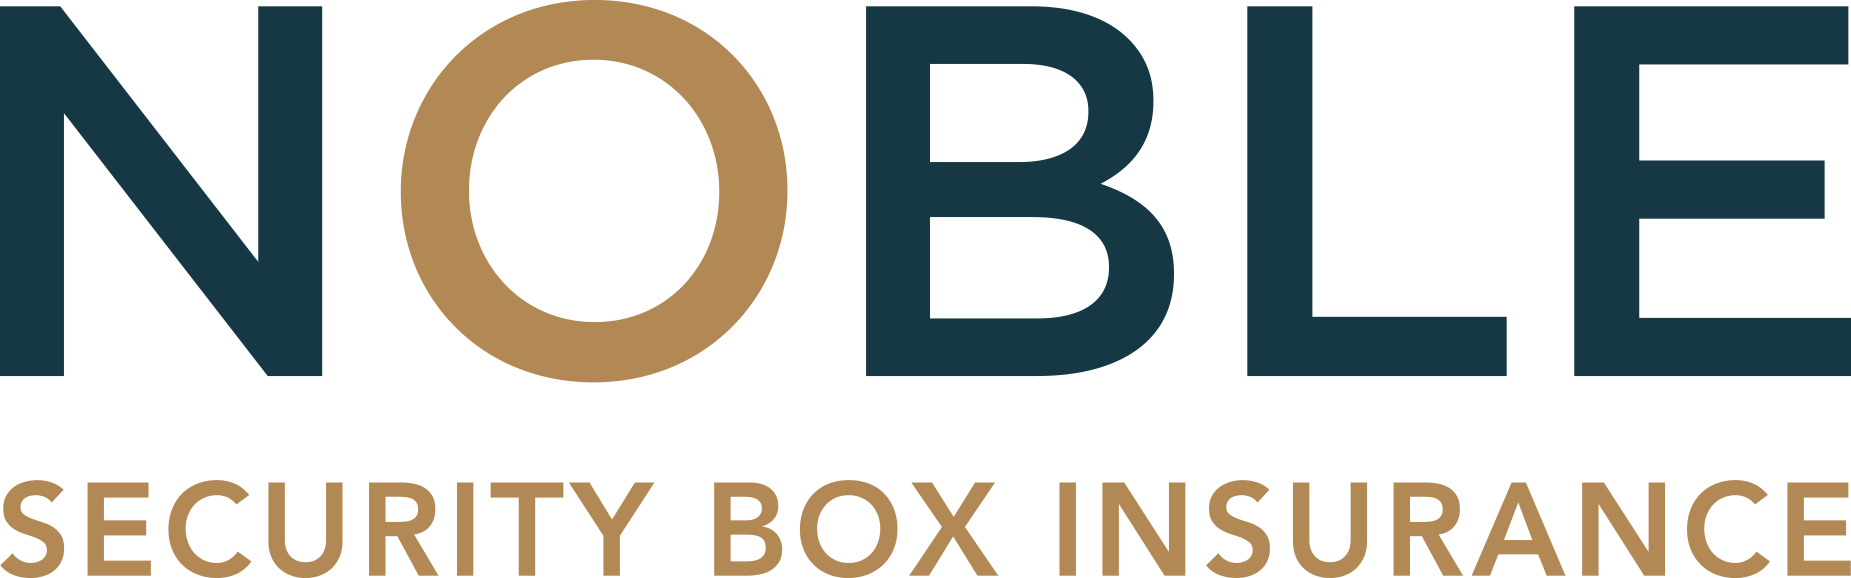 Noble Security Box Insurance